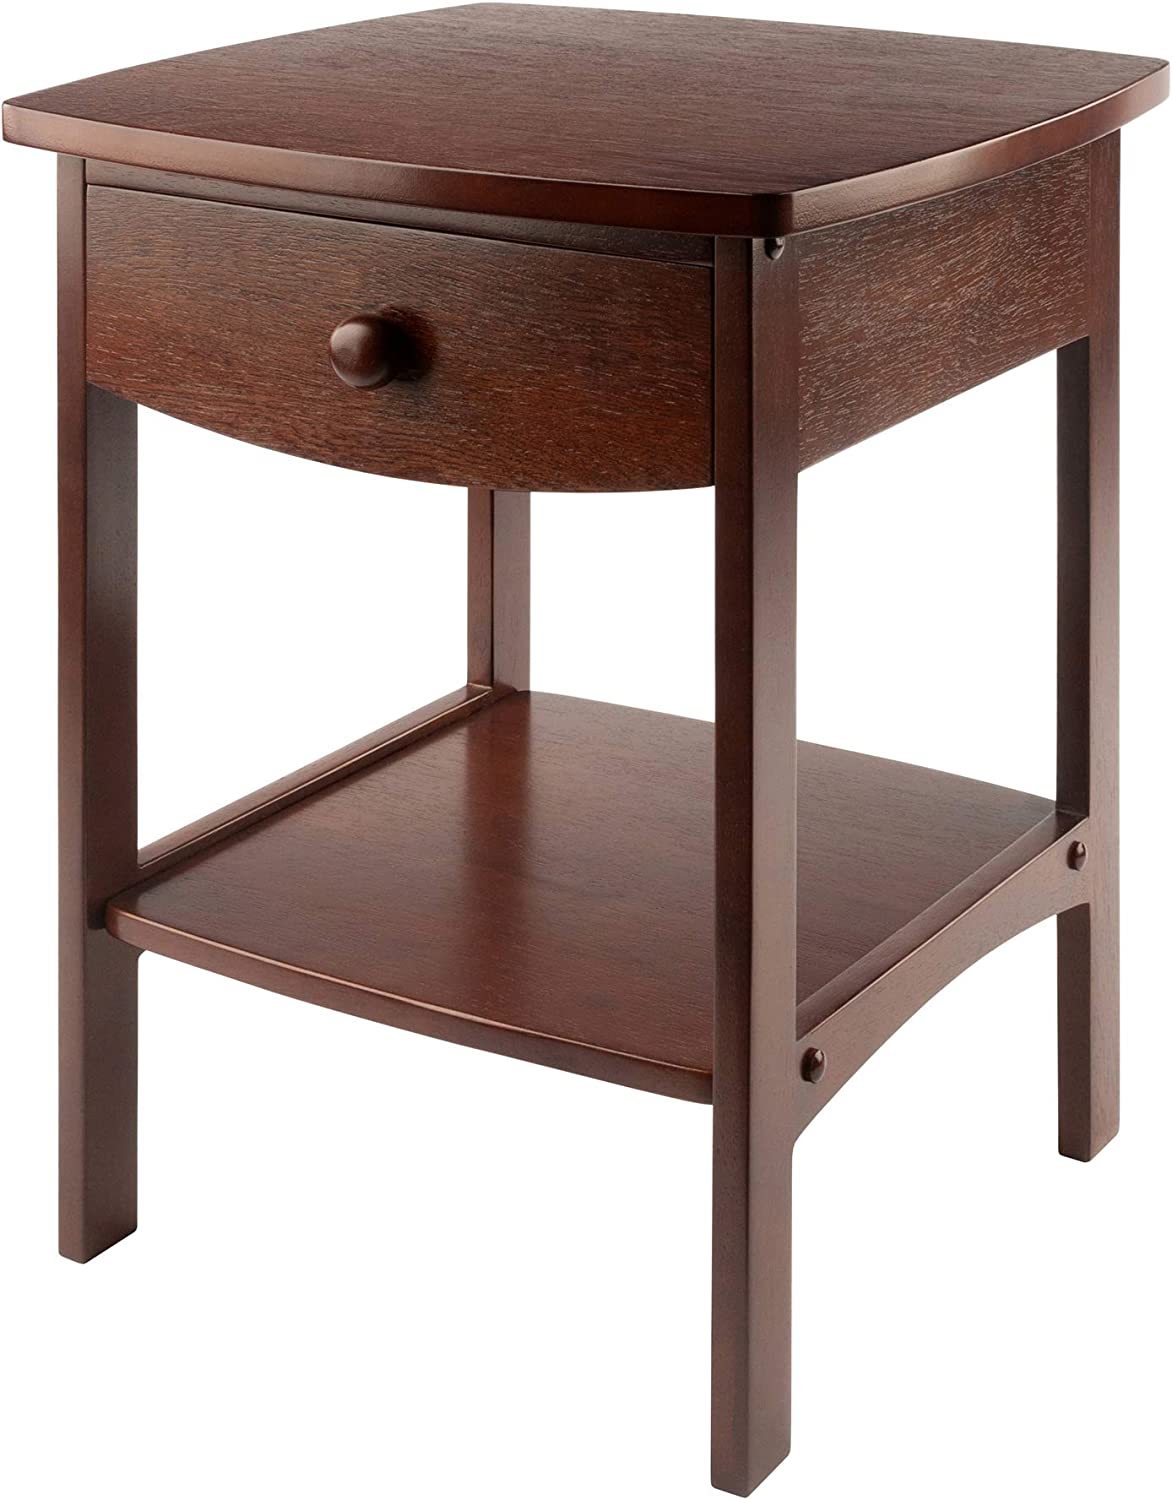 Walnut Winsome Wood Claire Accent Table - $64.95